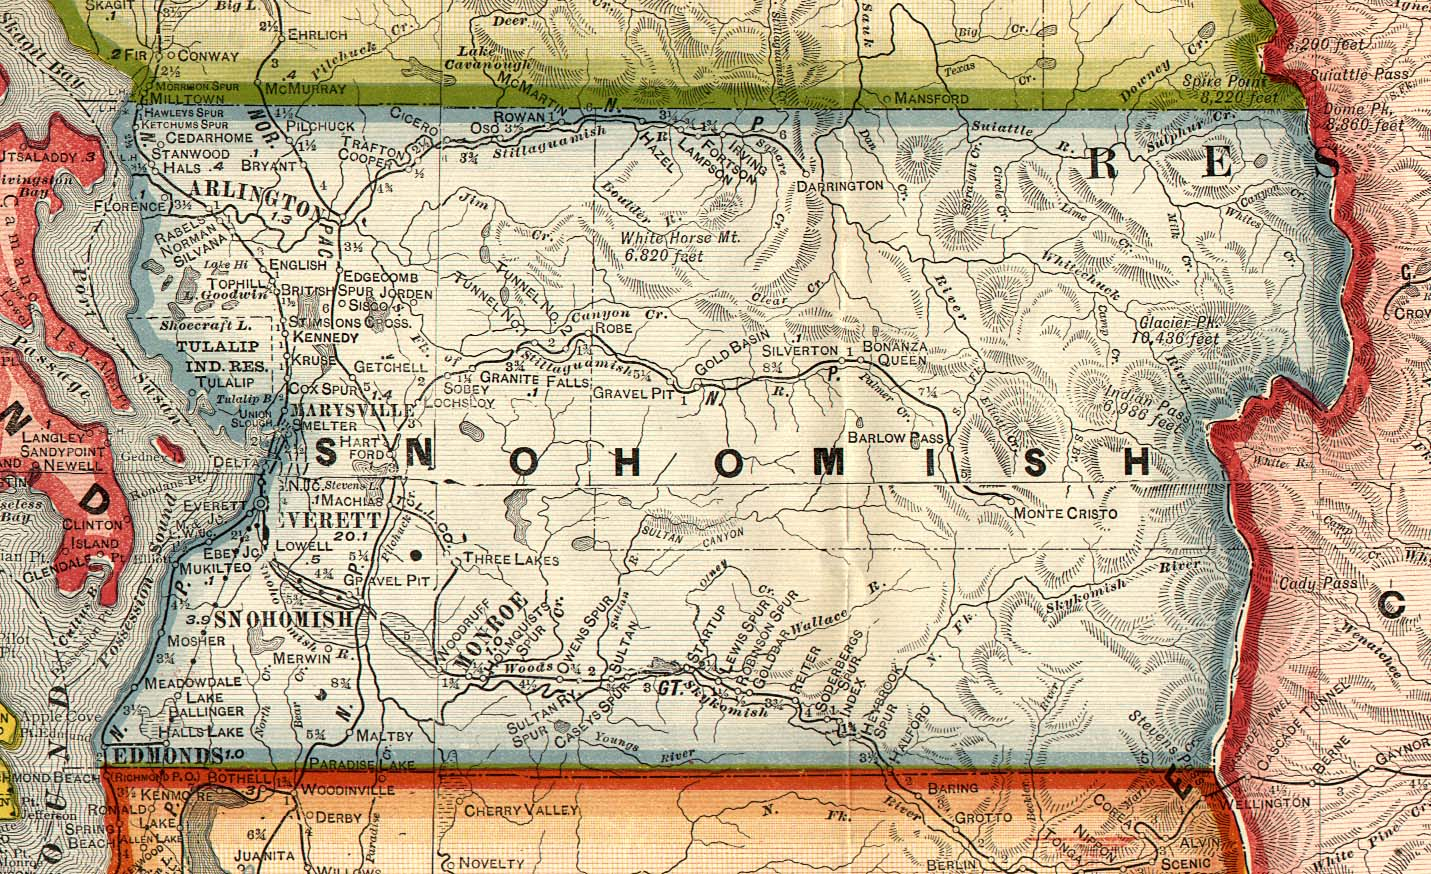 snohomish county map washington maps towns 1909 ghost wa state mines areas service seattle counties ghosttownsofwashington usgenweb town